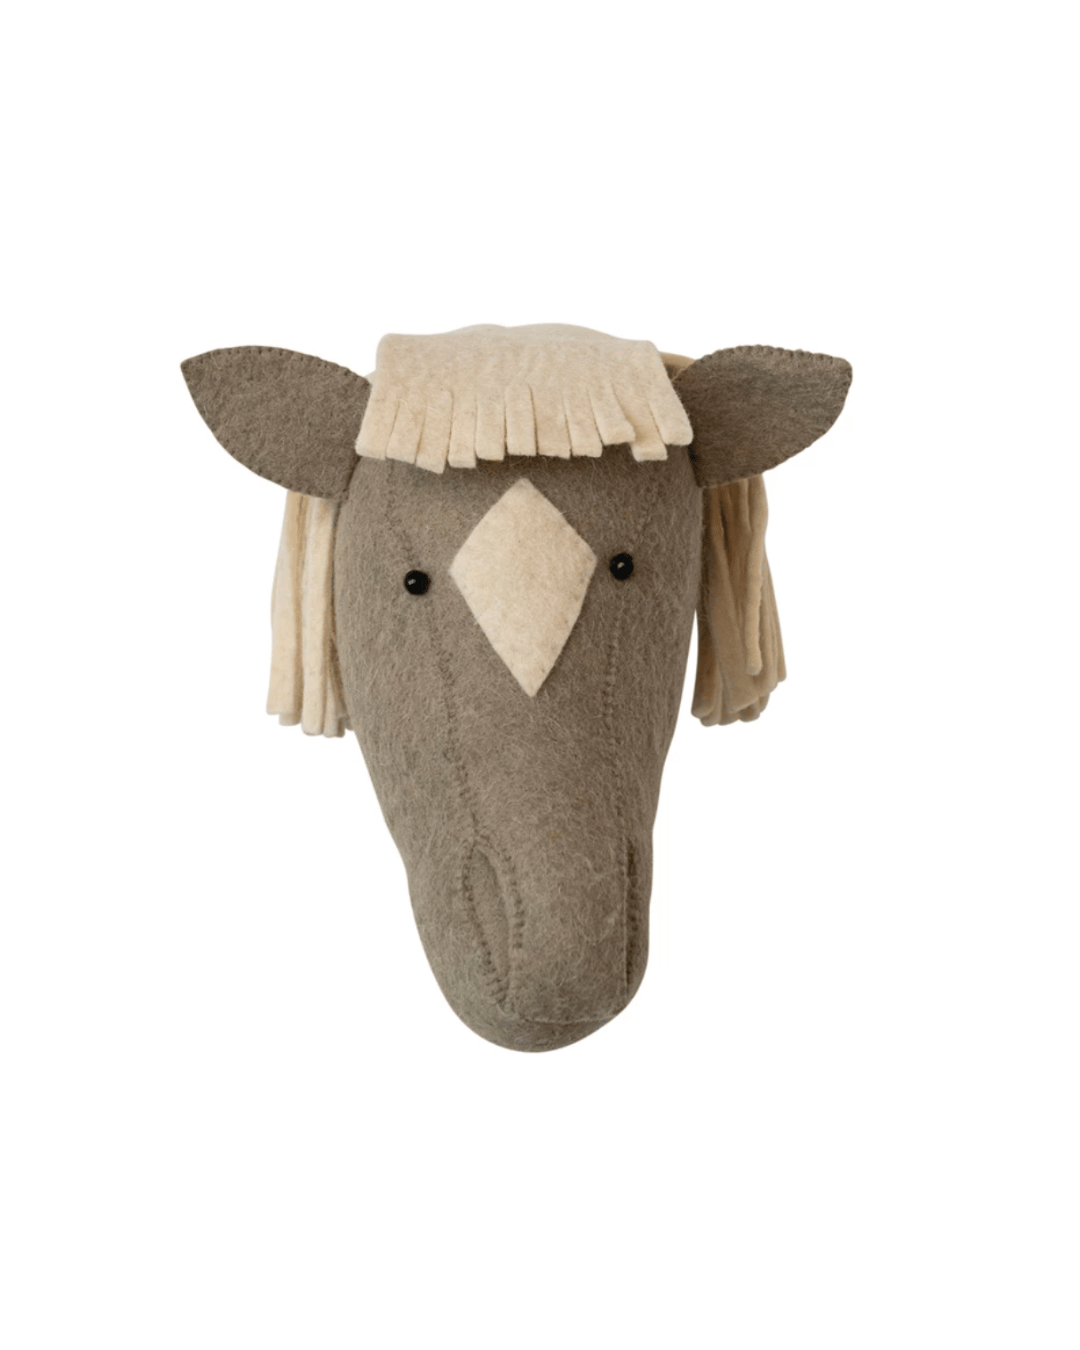 A whimsical wall-mounted felt horse sculpture of a deer head, stylized with simplified features, including fabric ears and hair, against a white background, perfect for a Scottsdale Arizona bungalow by Creative Co-op.